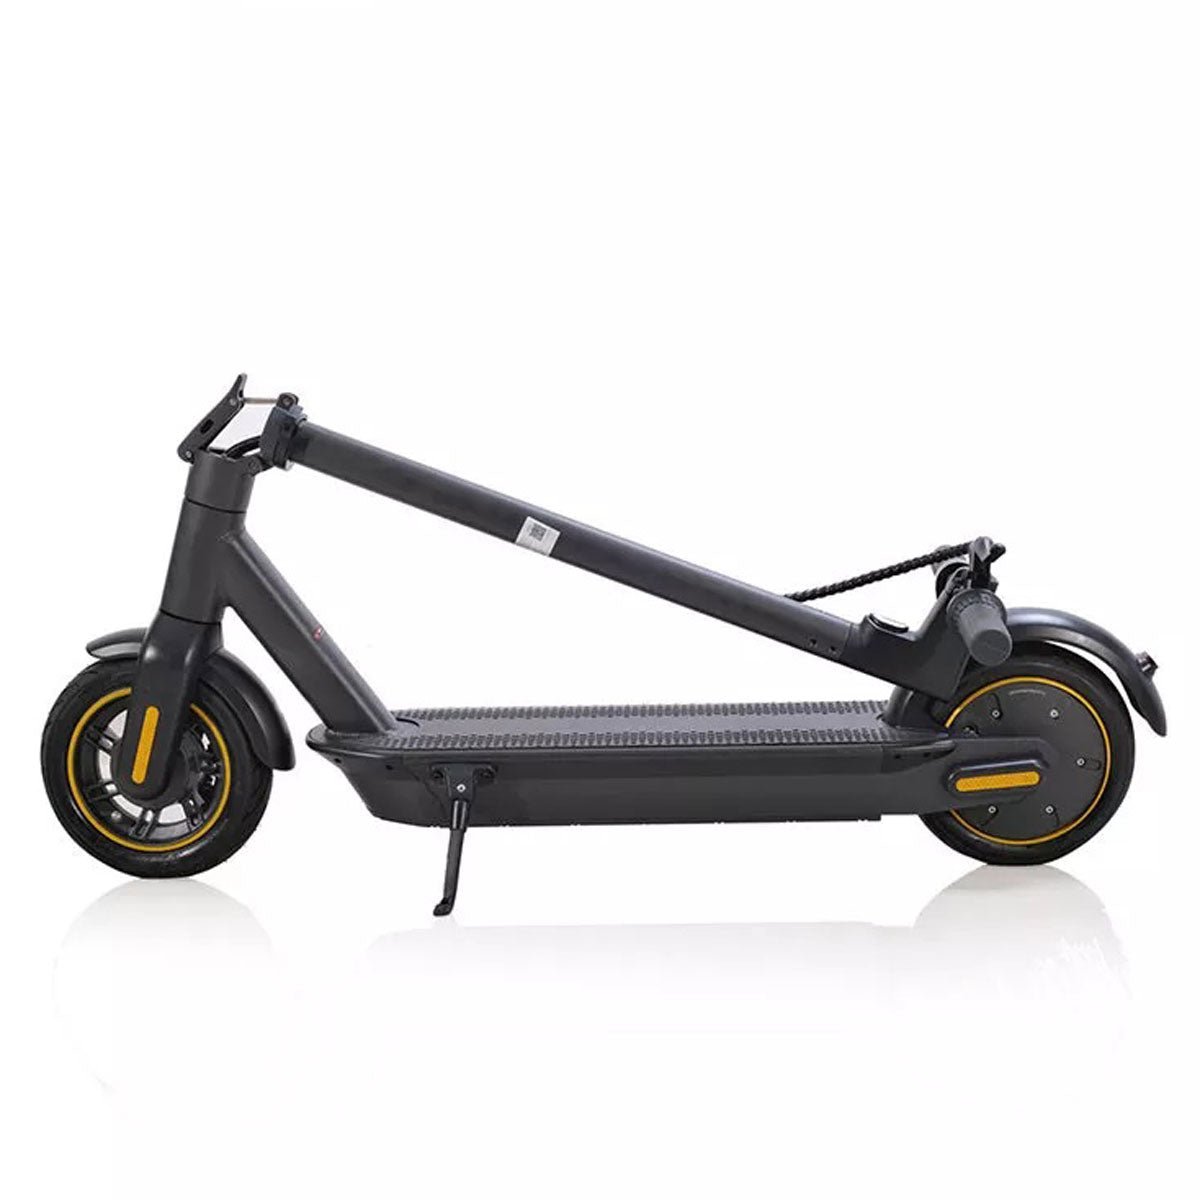 Emoko HT-T4 Max Foldable Adult Scooter - 120 Kg Payload, 500W - Electric EU